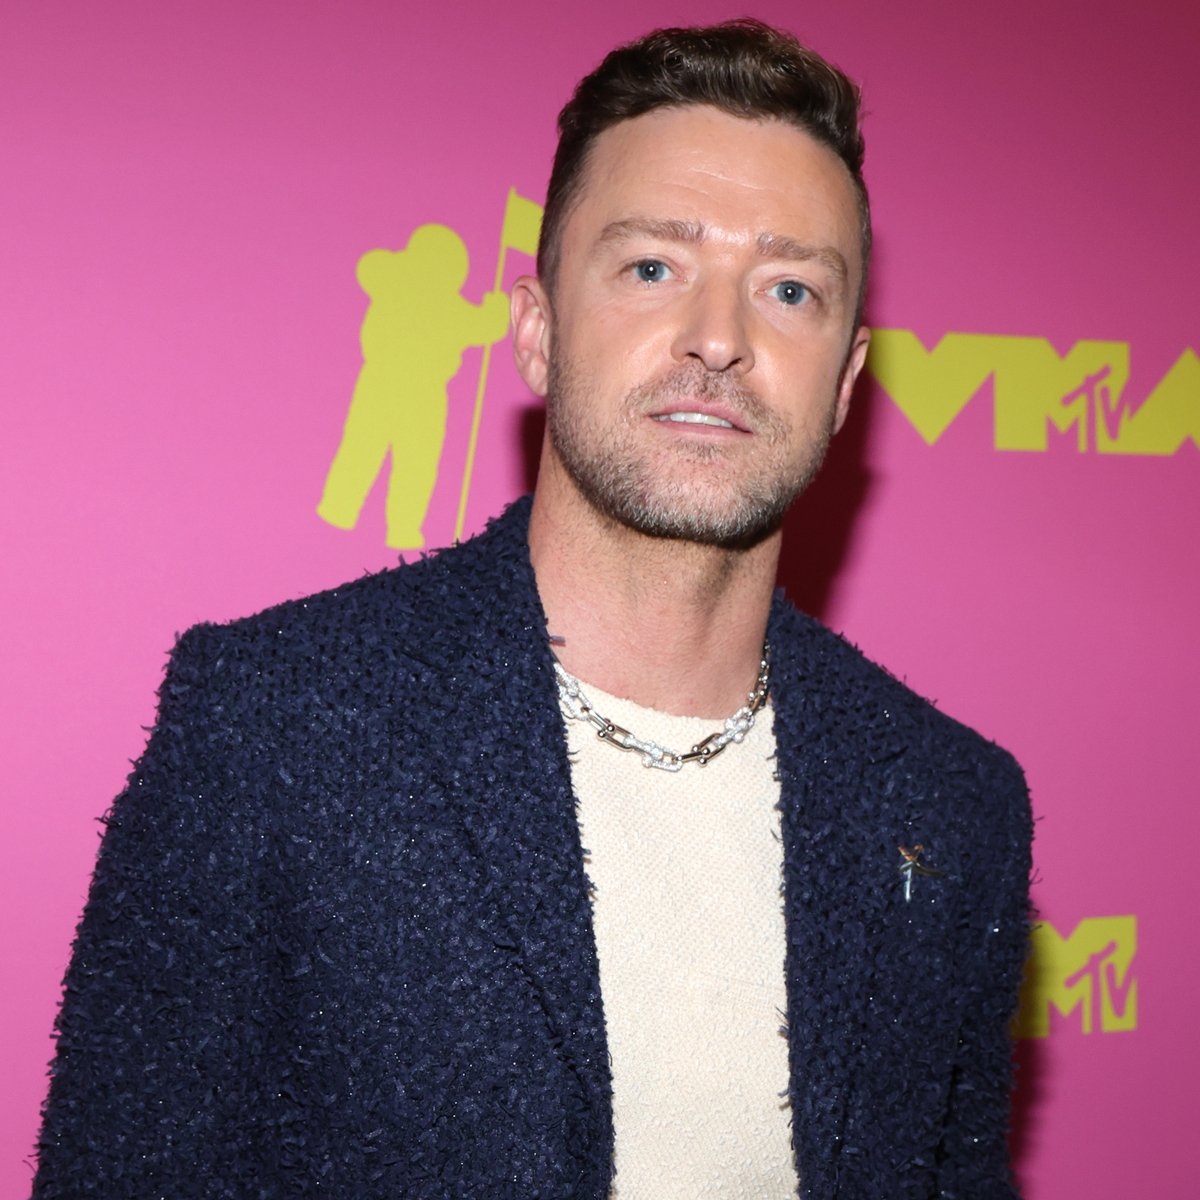 Justin Timberlake Reveals the Real Reason He Sang “It’s Gonna Be May”